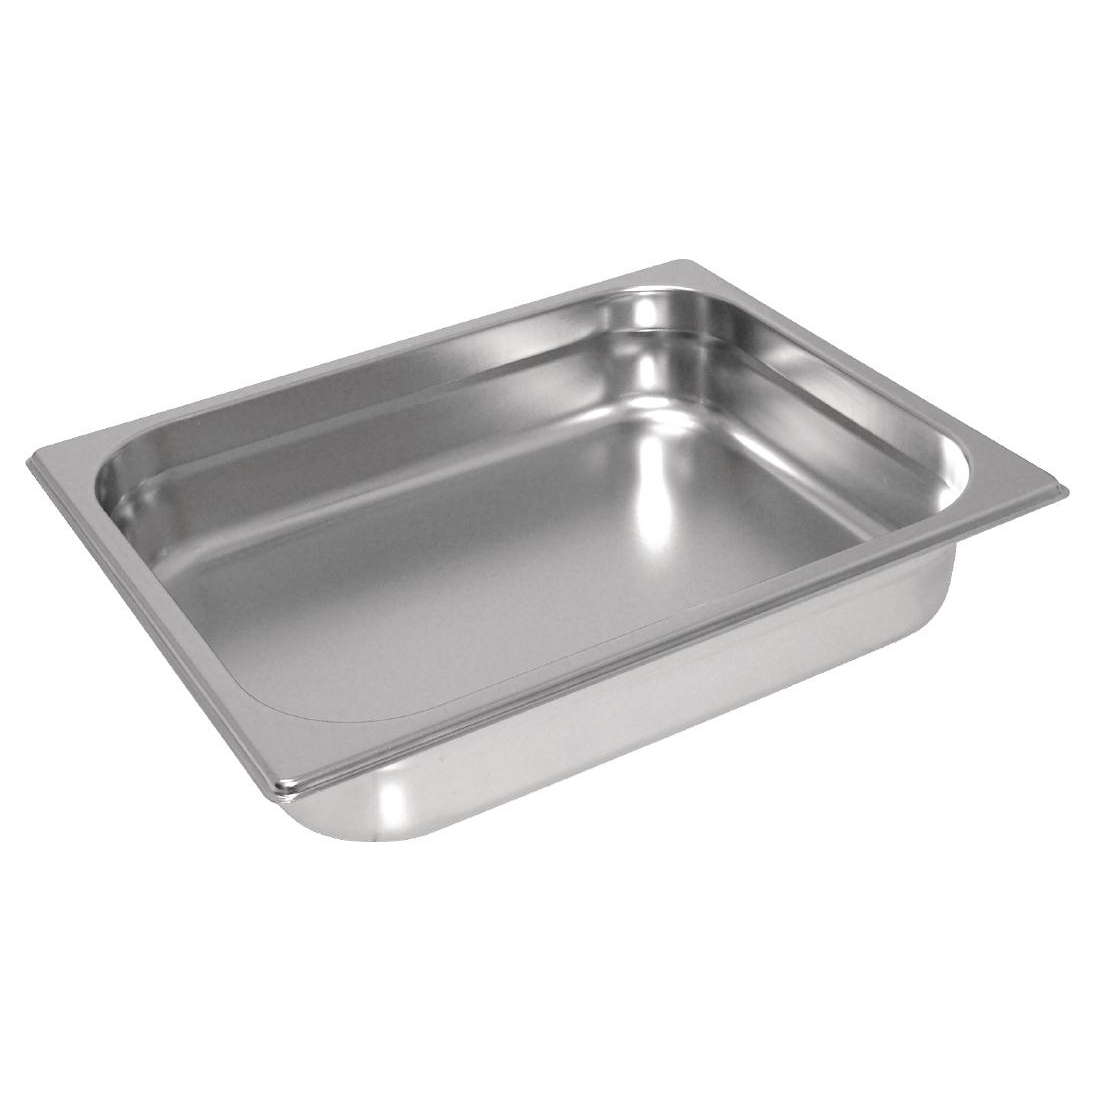 Vogue Heavy Duty Stainless Steel 1/2 Gastronorm Pan 100mm